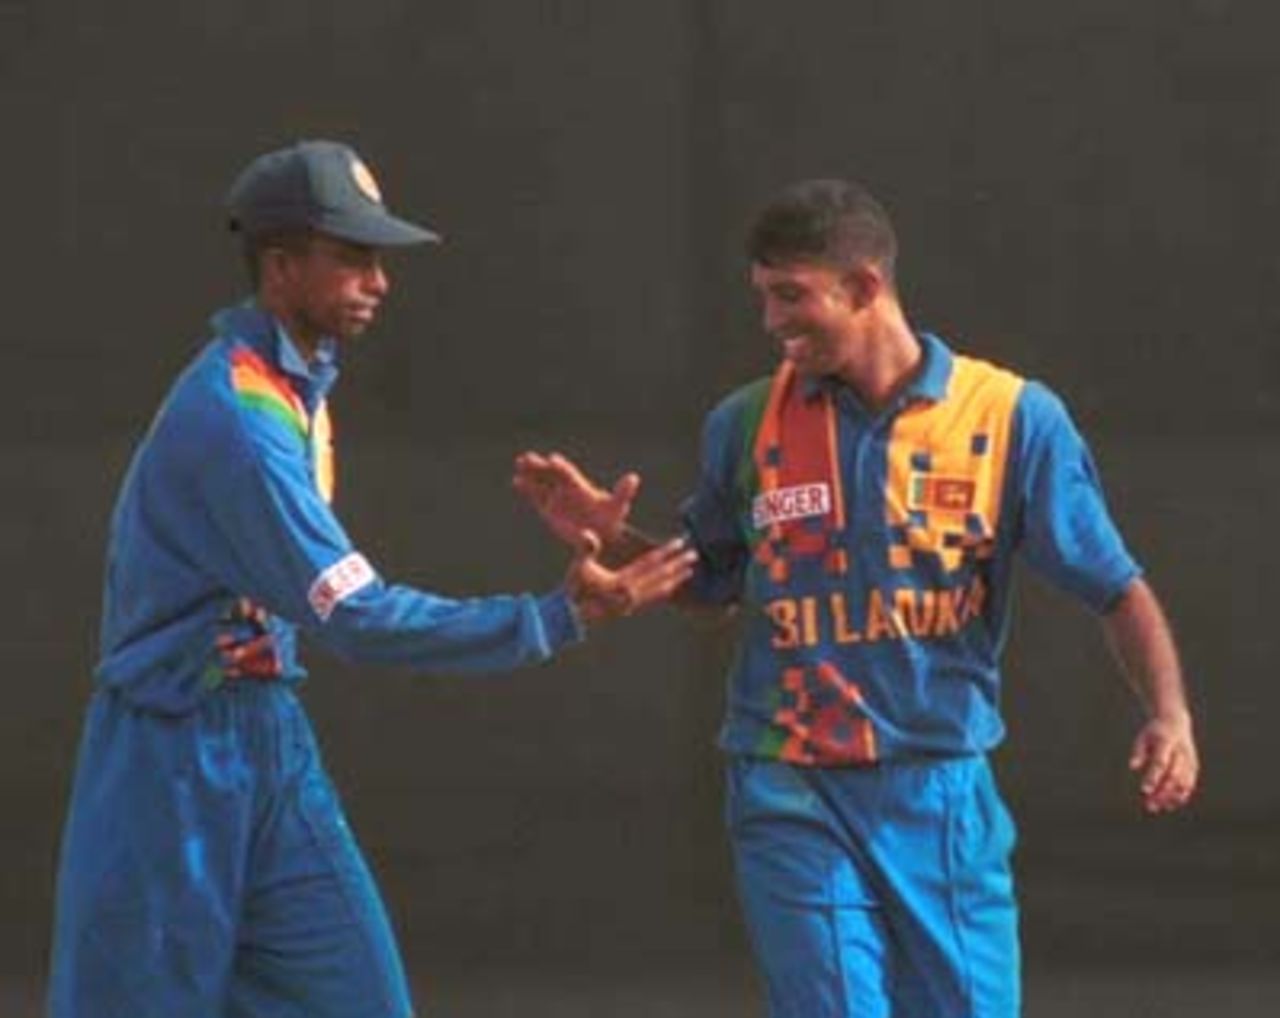 Sri Lankan cricketers celebrate during the Singer Cup Triangular limited overs cricket match against South Africa in Galle International stadium in Galle Sri Lanka on Thursday, July. 6, 2000